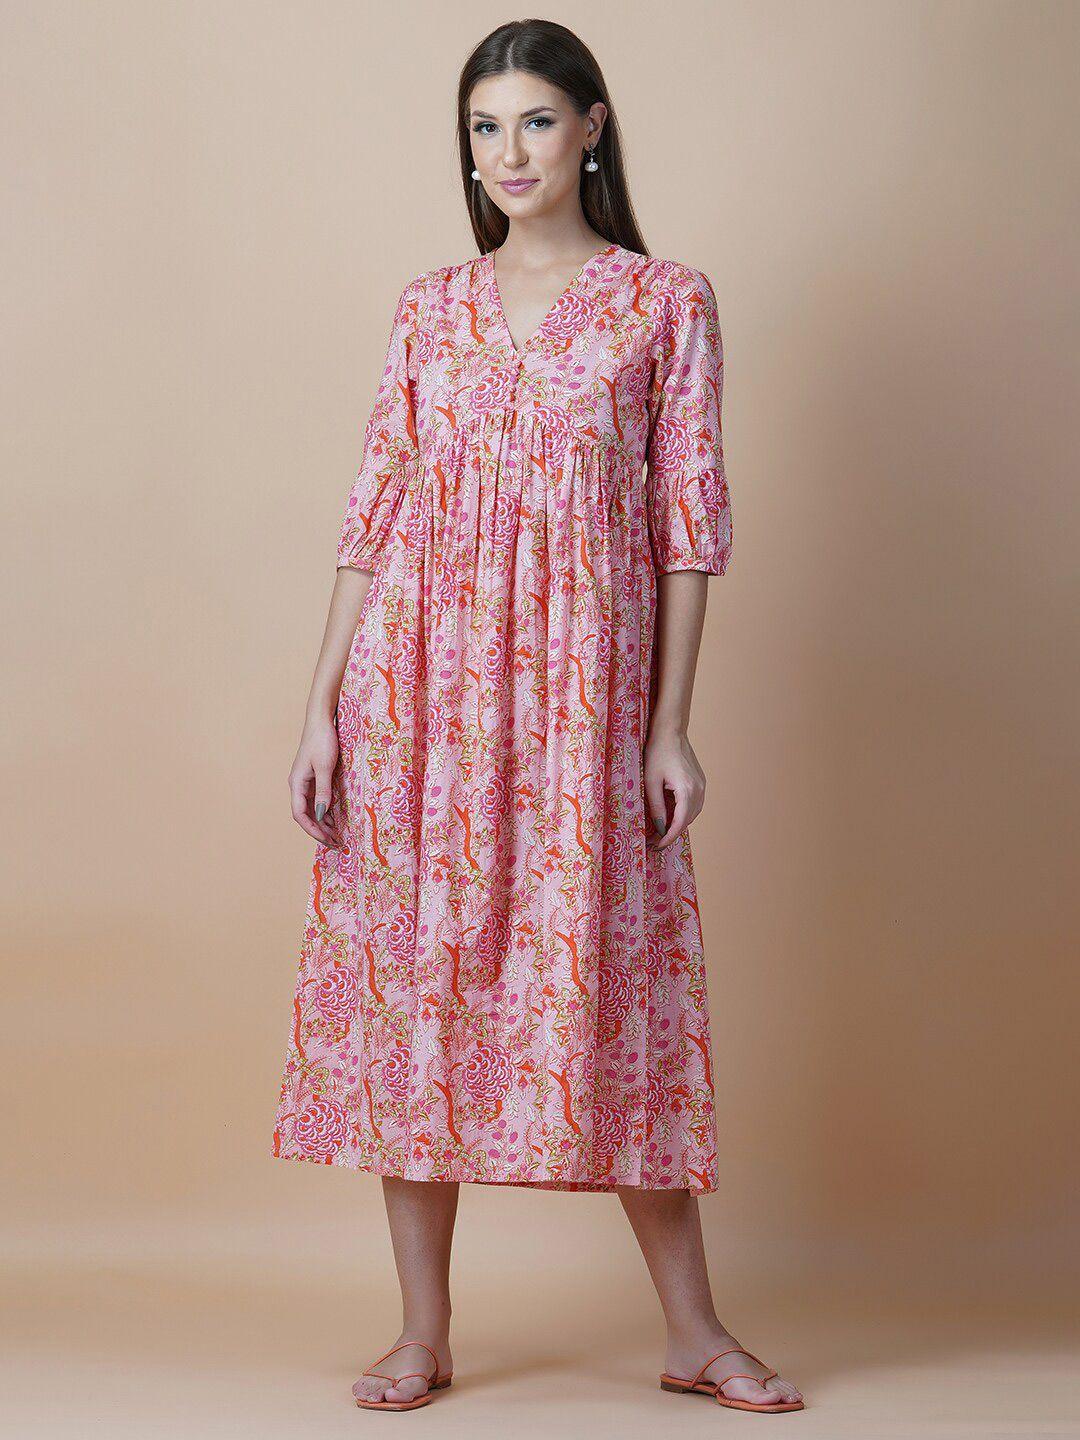 twilldor pink cotton floral ethnic a-line dress